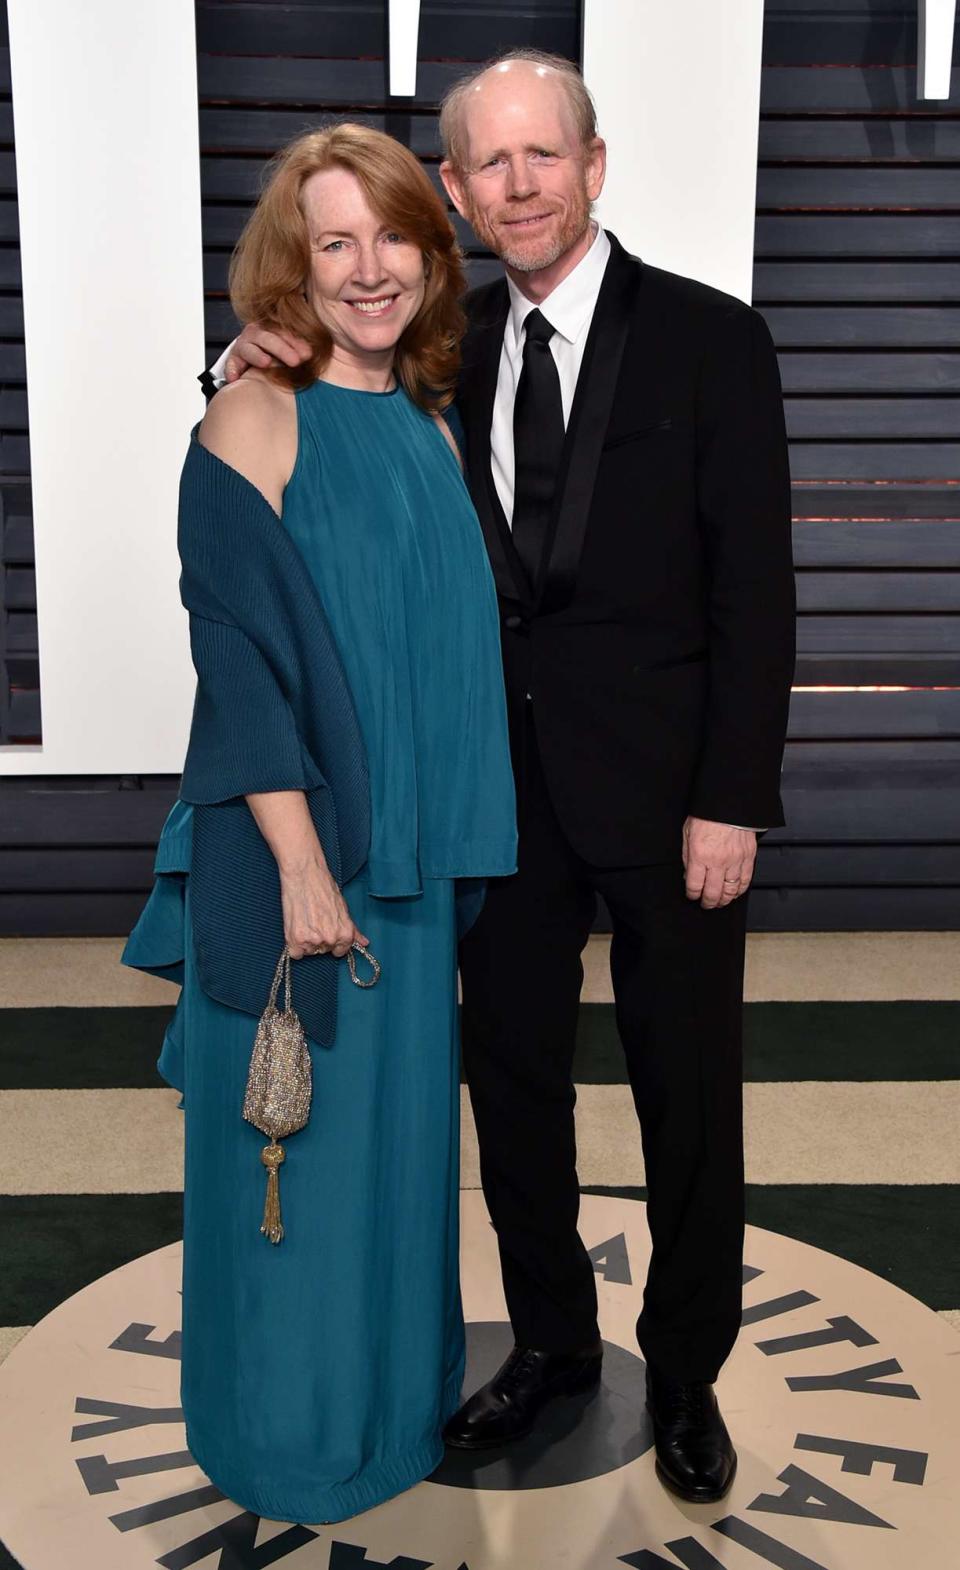 Ron Howard (R) and Cheryl Howard attend the 2017 Vanity Fair Oscar Party hosted by Graydon Carter at Wallis Annenberg Center for the Performing Arts on February 26, 2017 in Beverly Hills, California